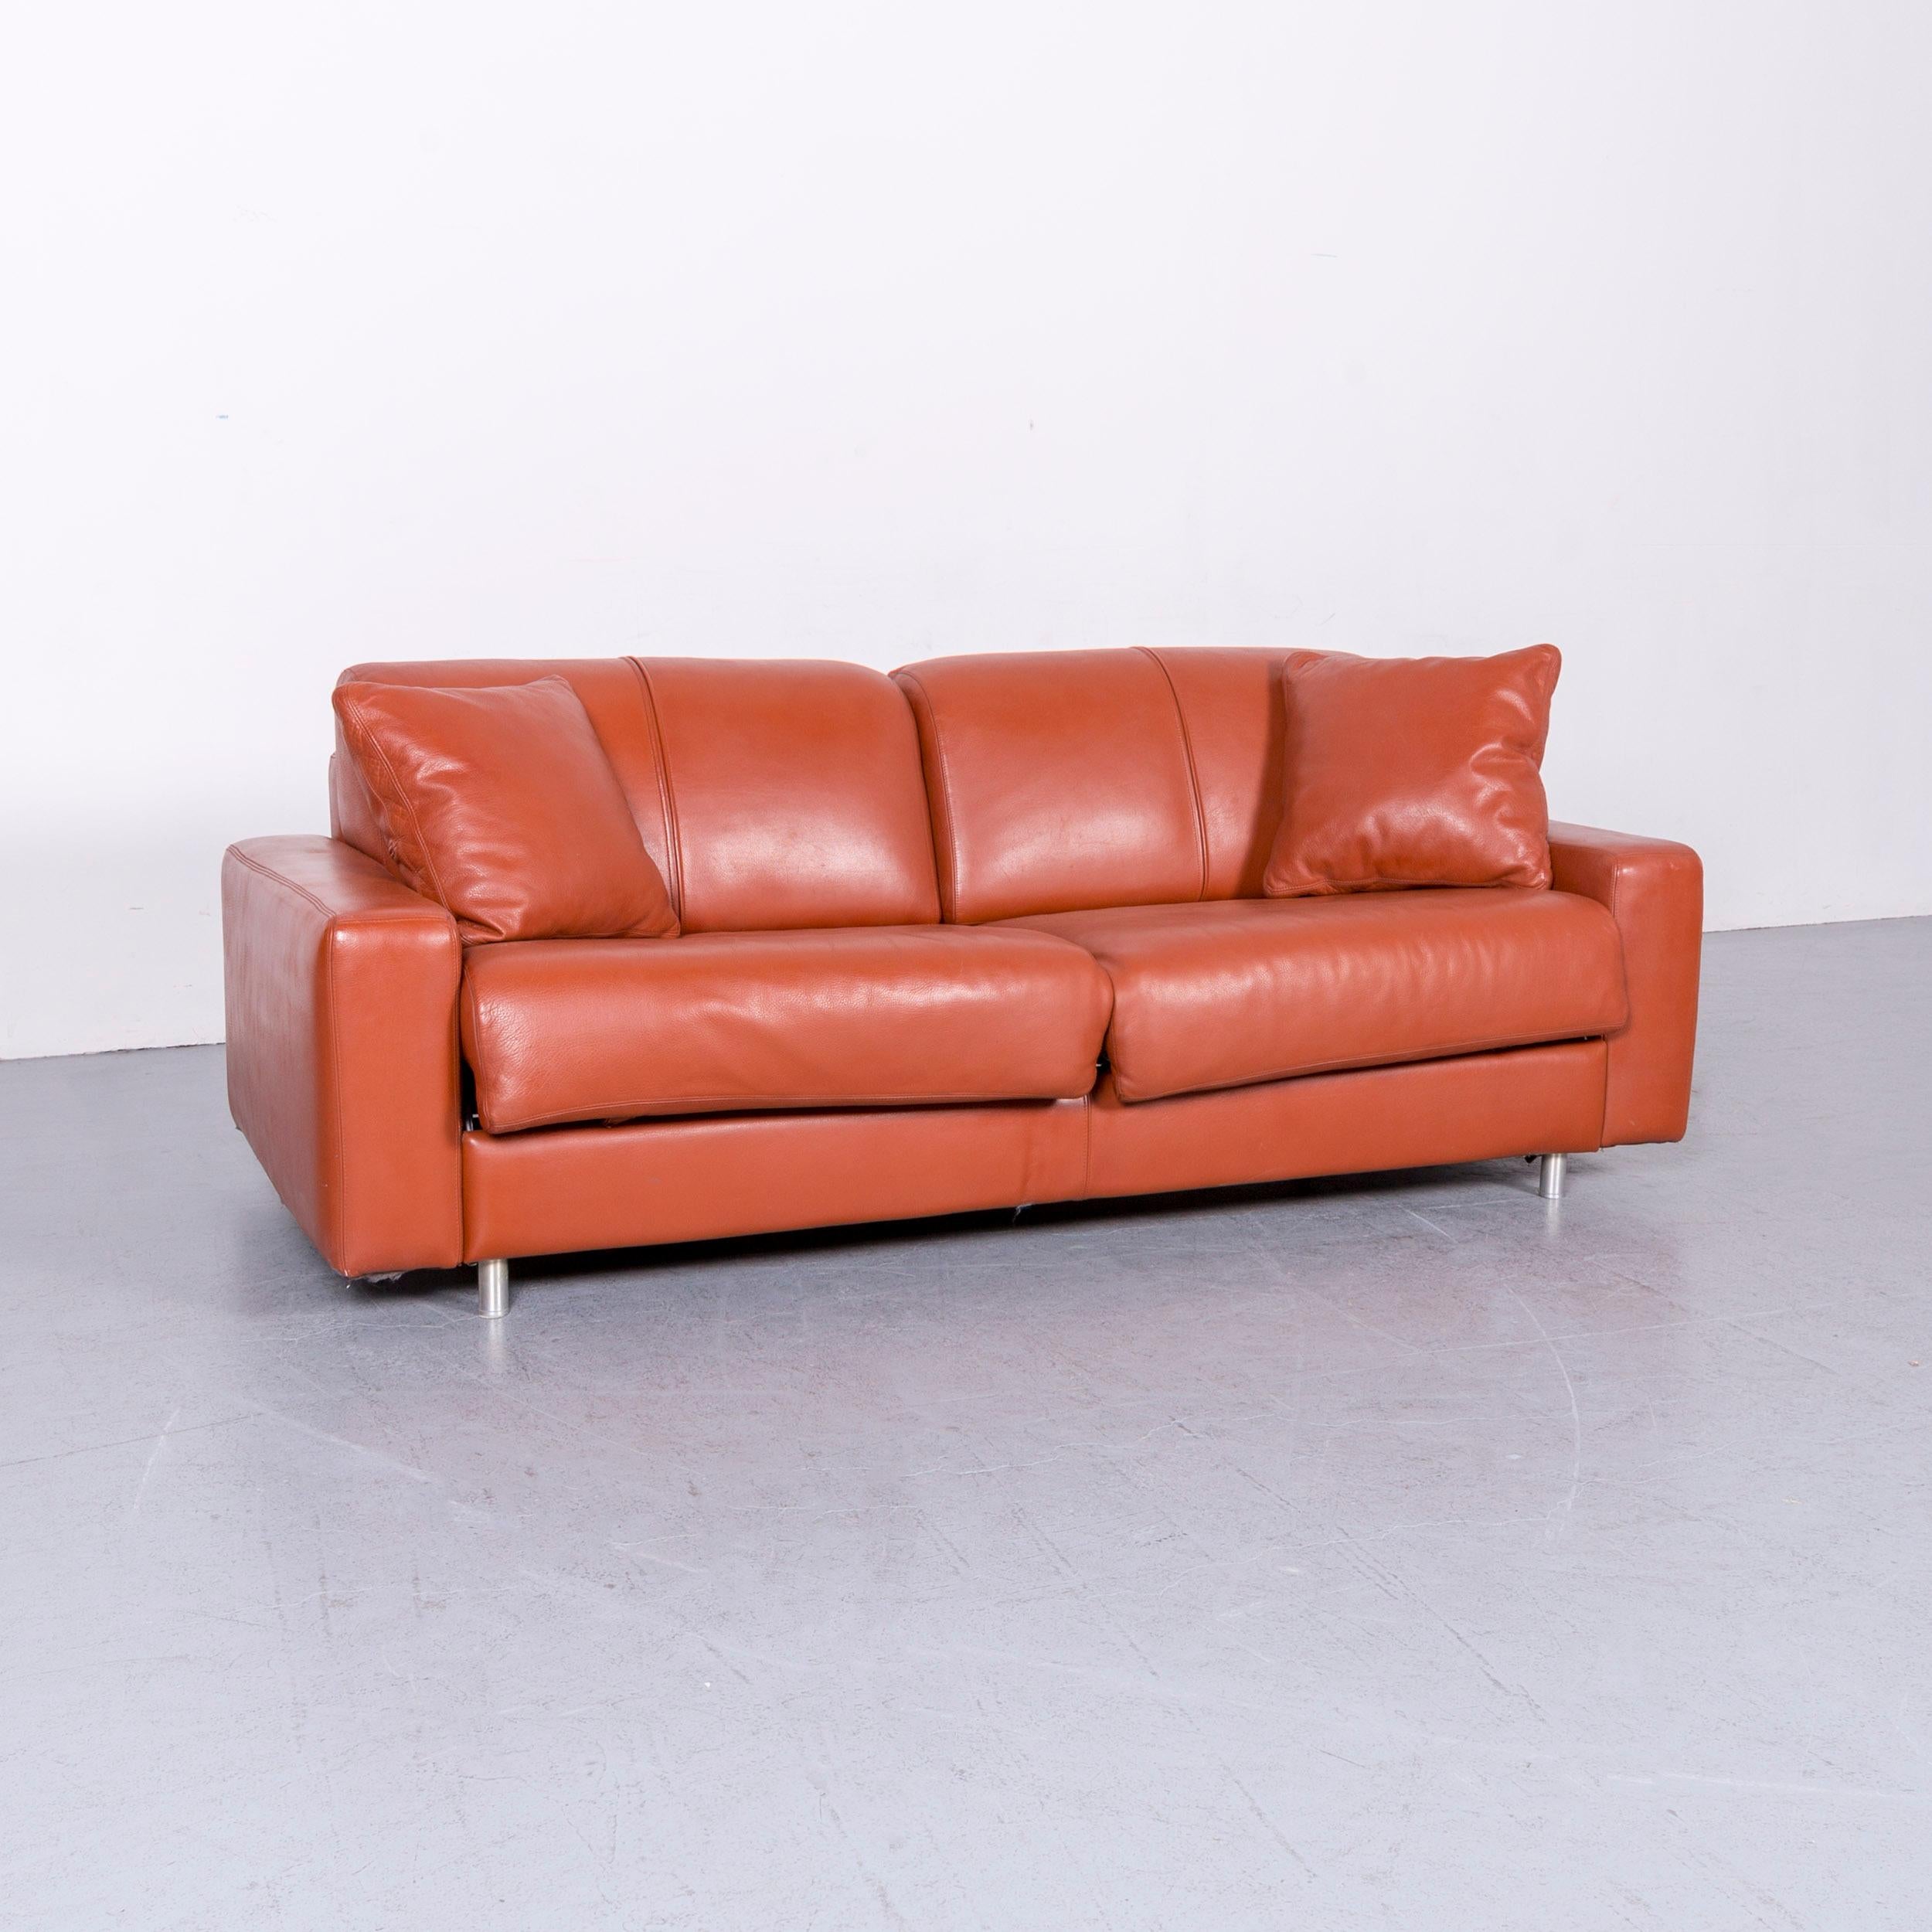 We bring to you an Cramer leather bed sofa orange three-seat couch.